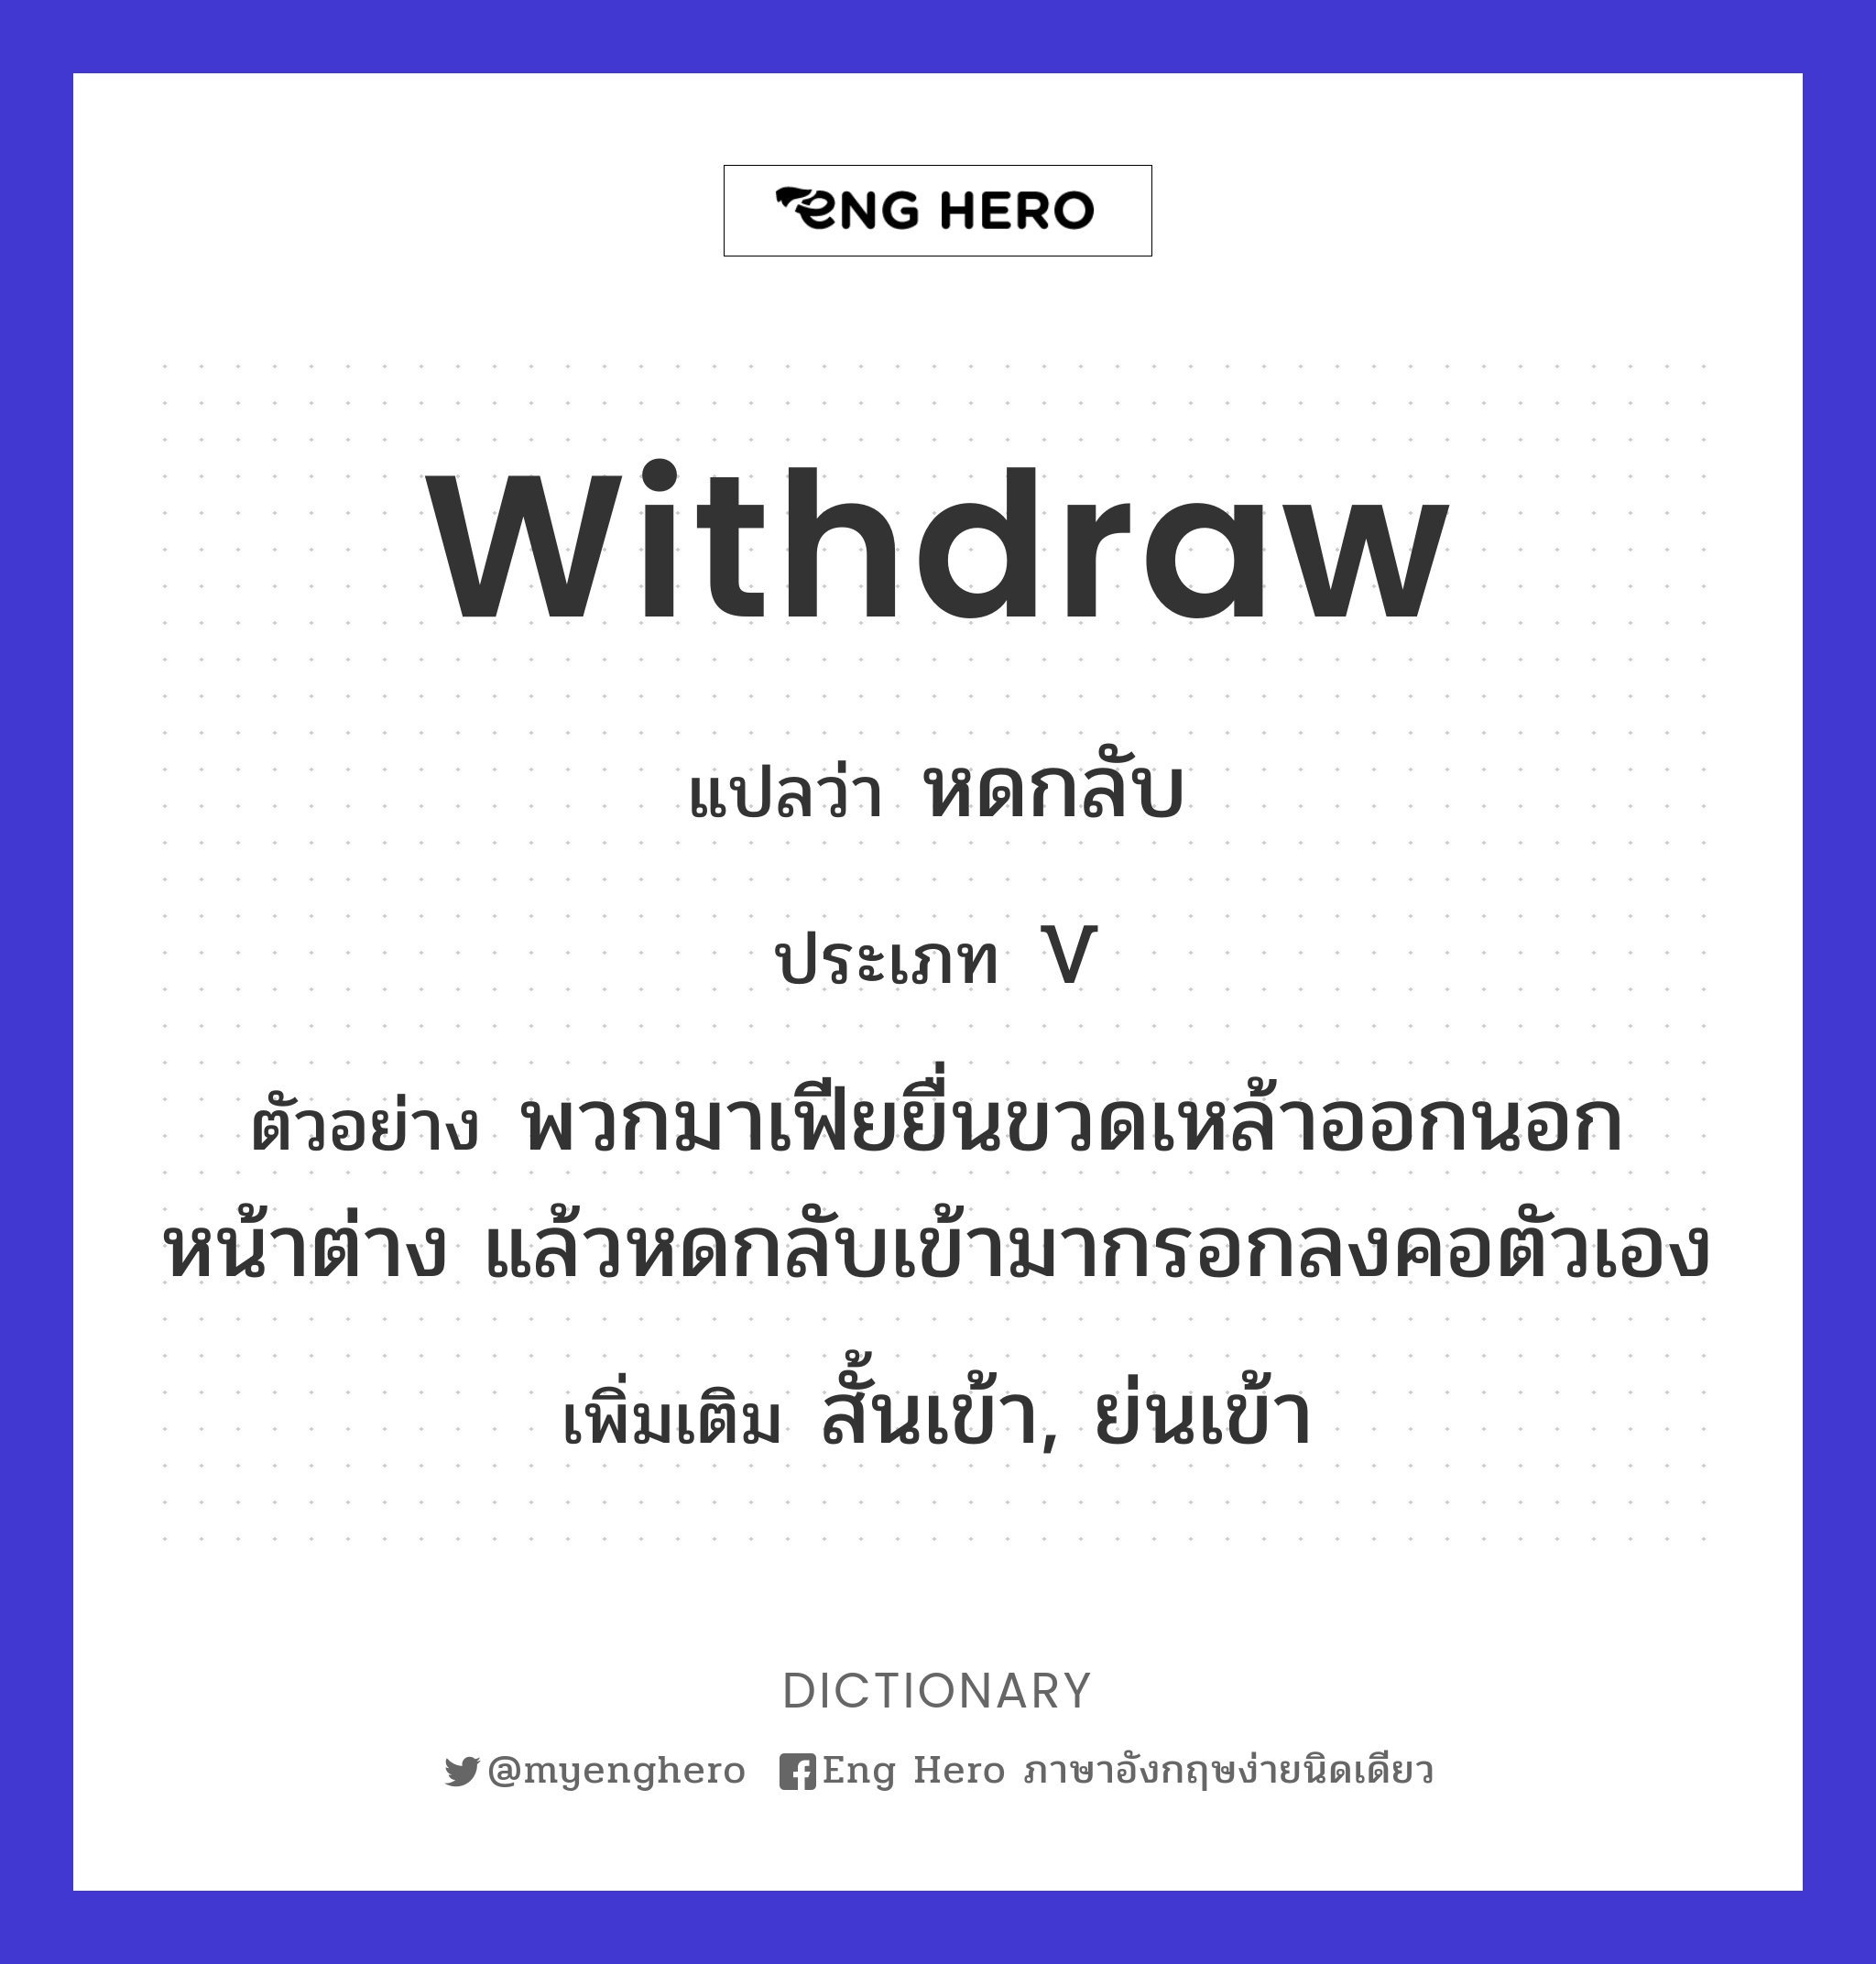 withdraw